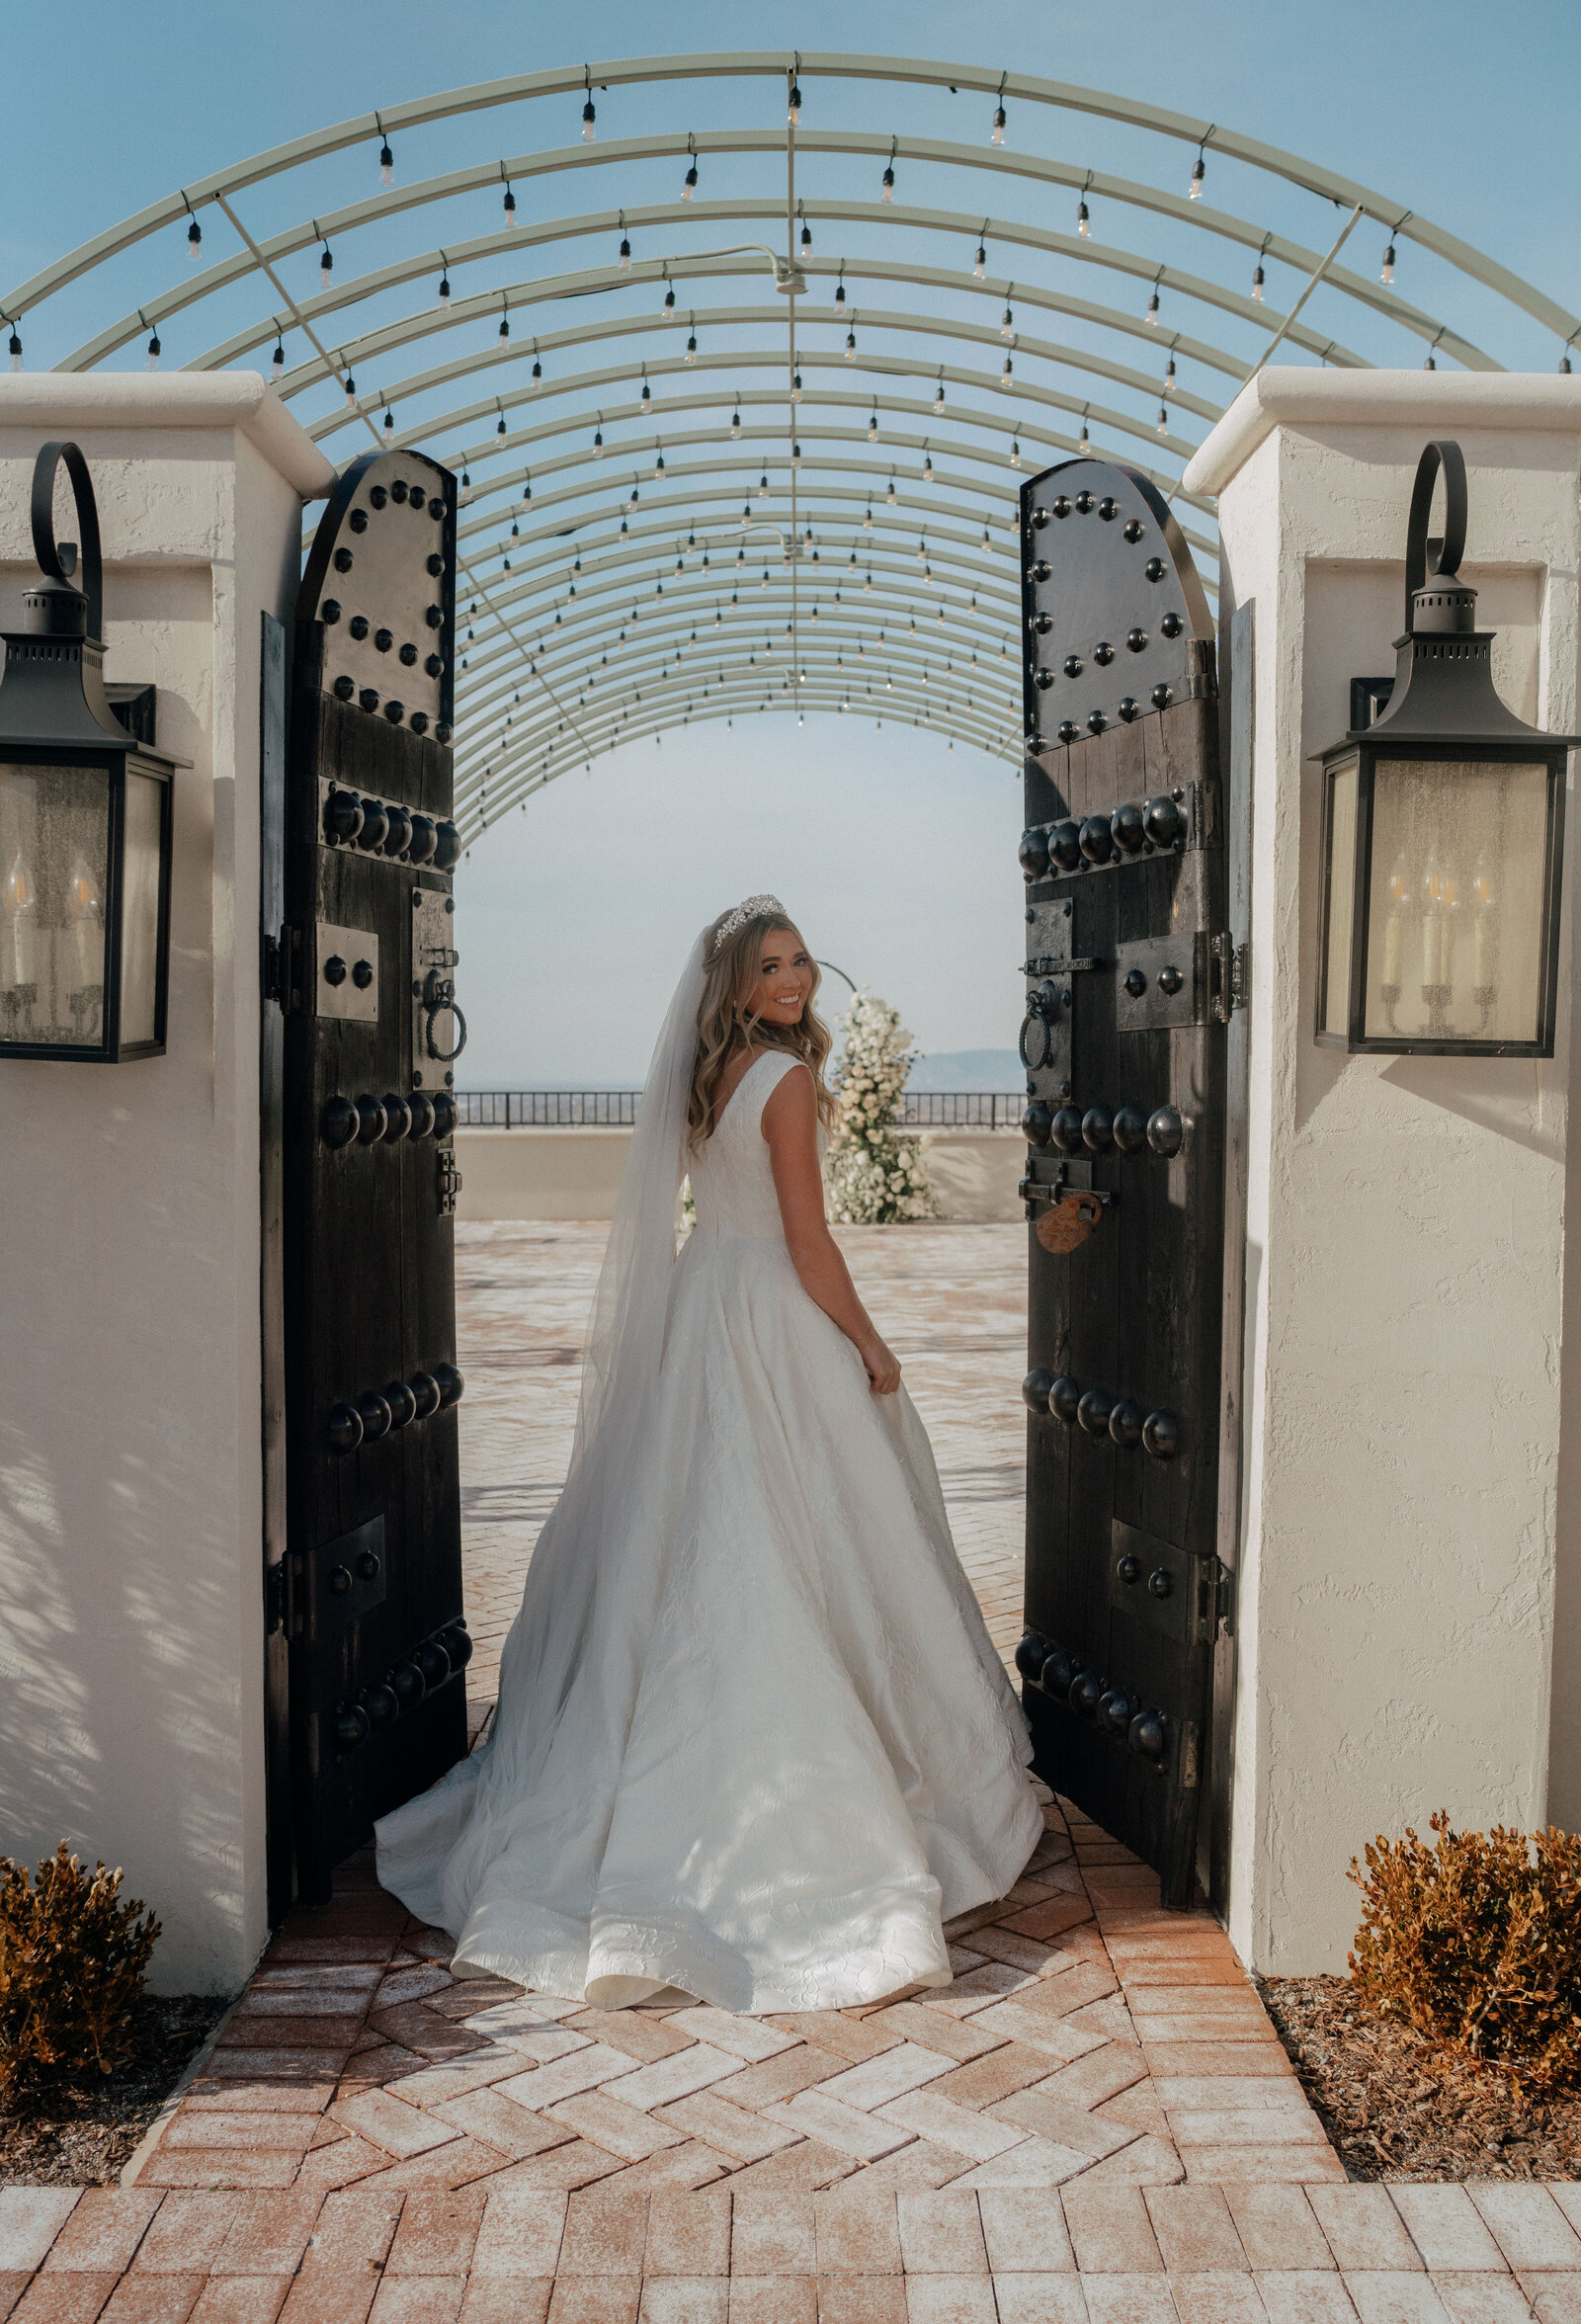 Bride in front of ceremony gate